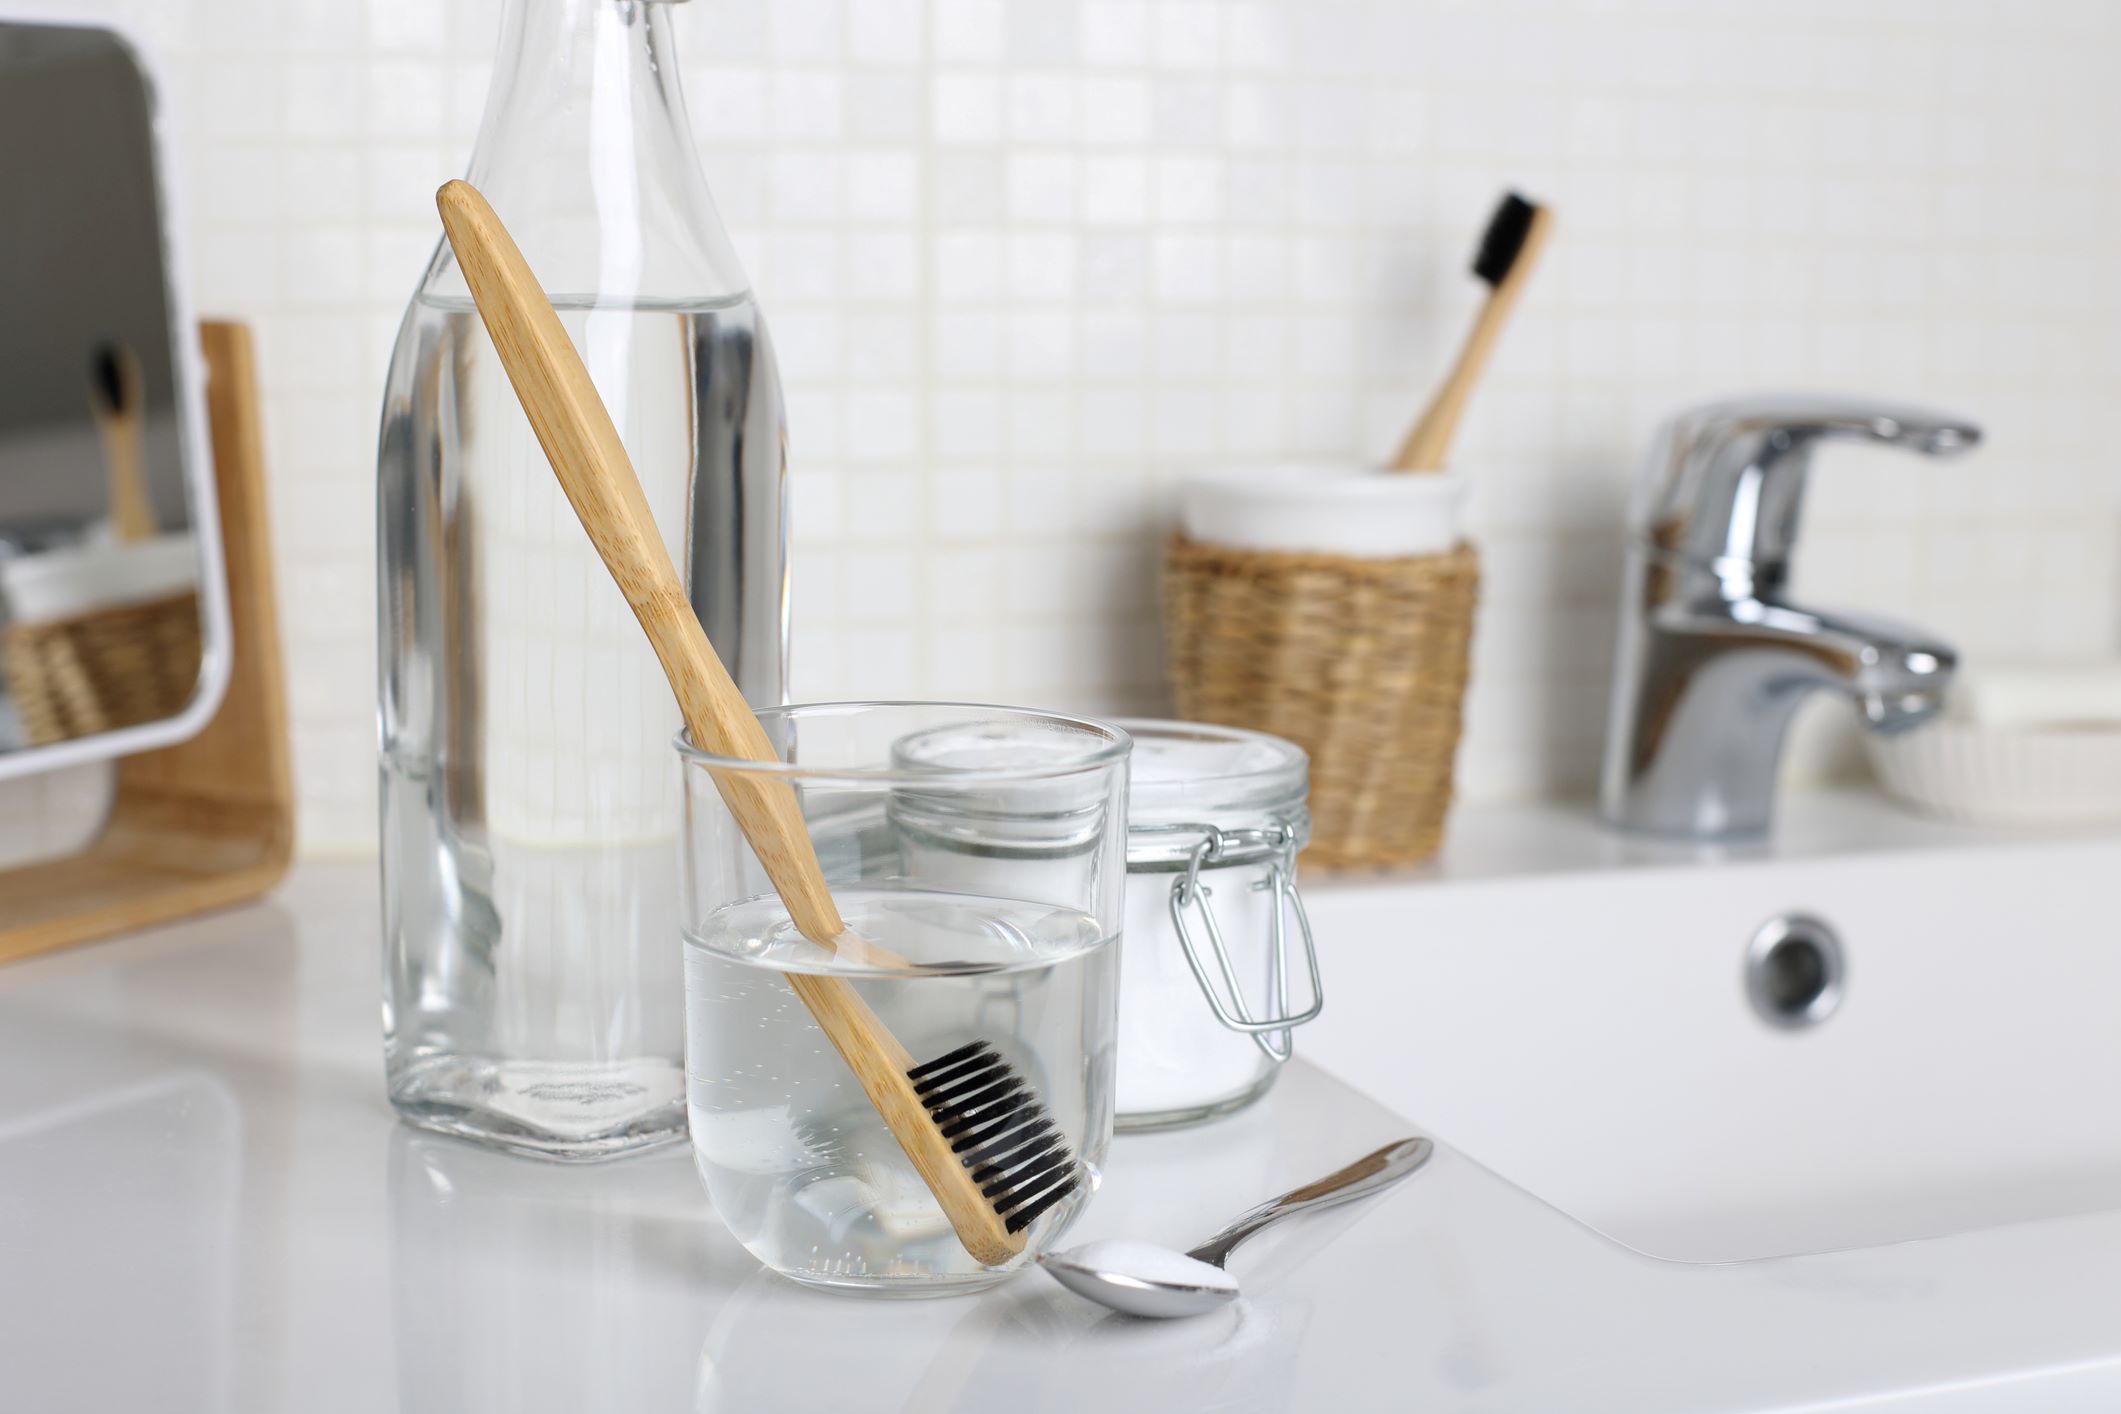 How To Clean Your Toothbrush With Hydrogen Peroxide